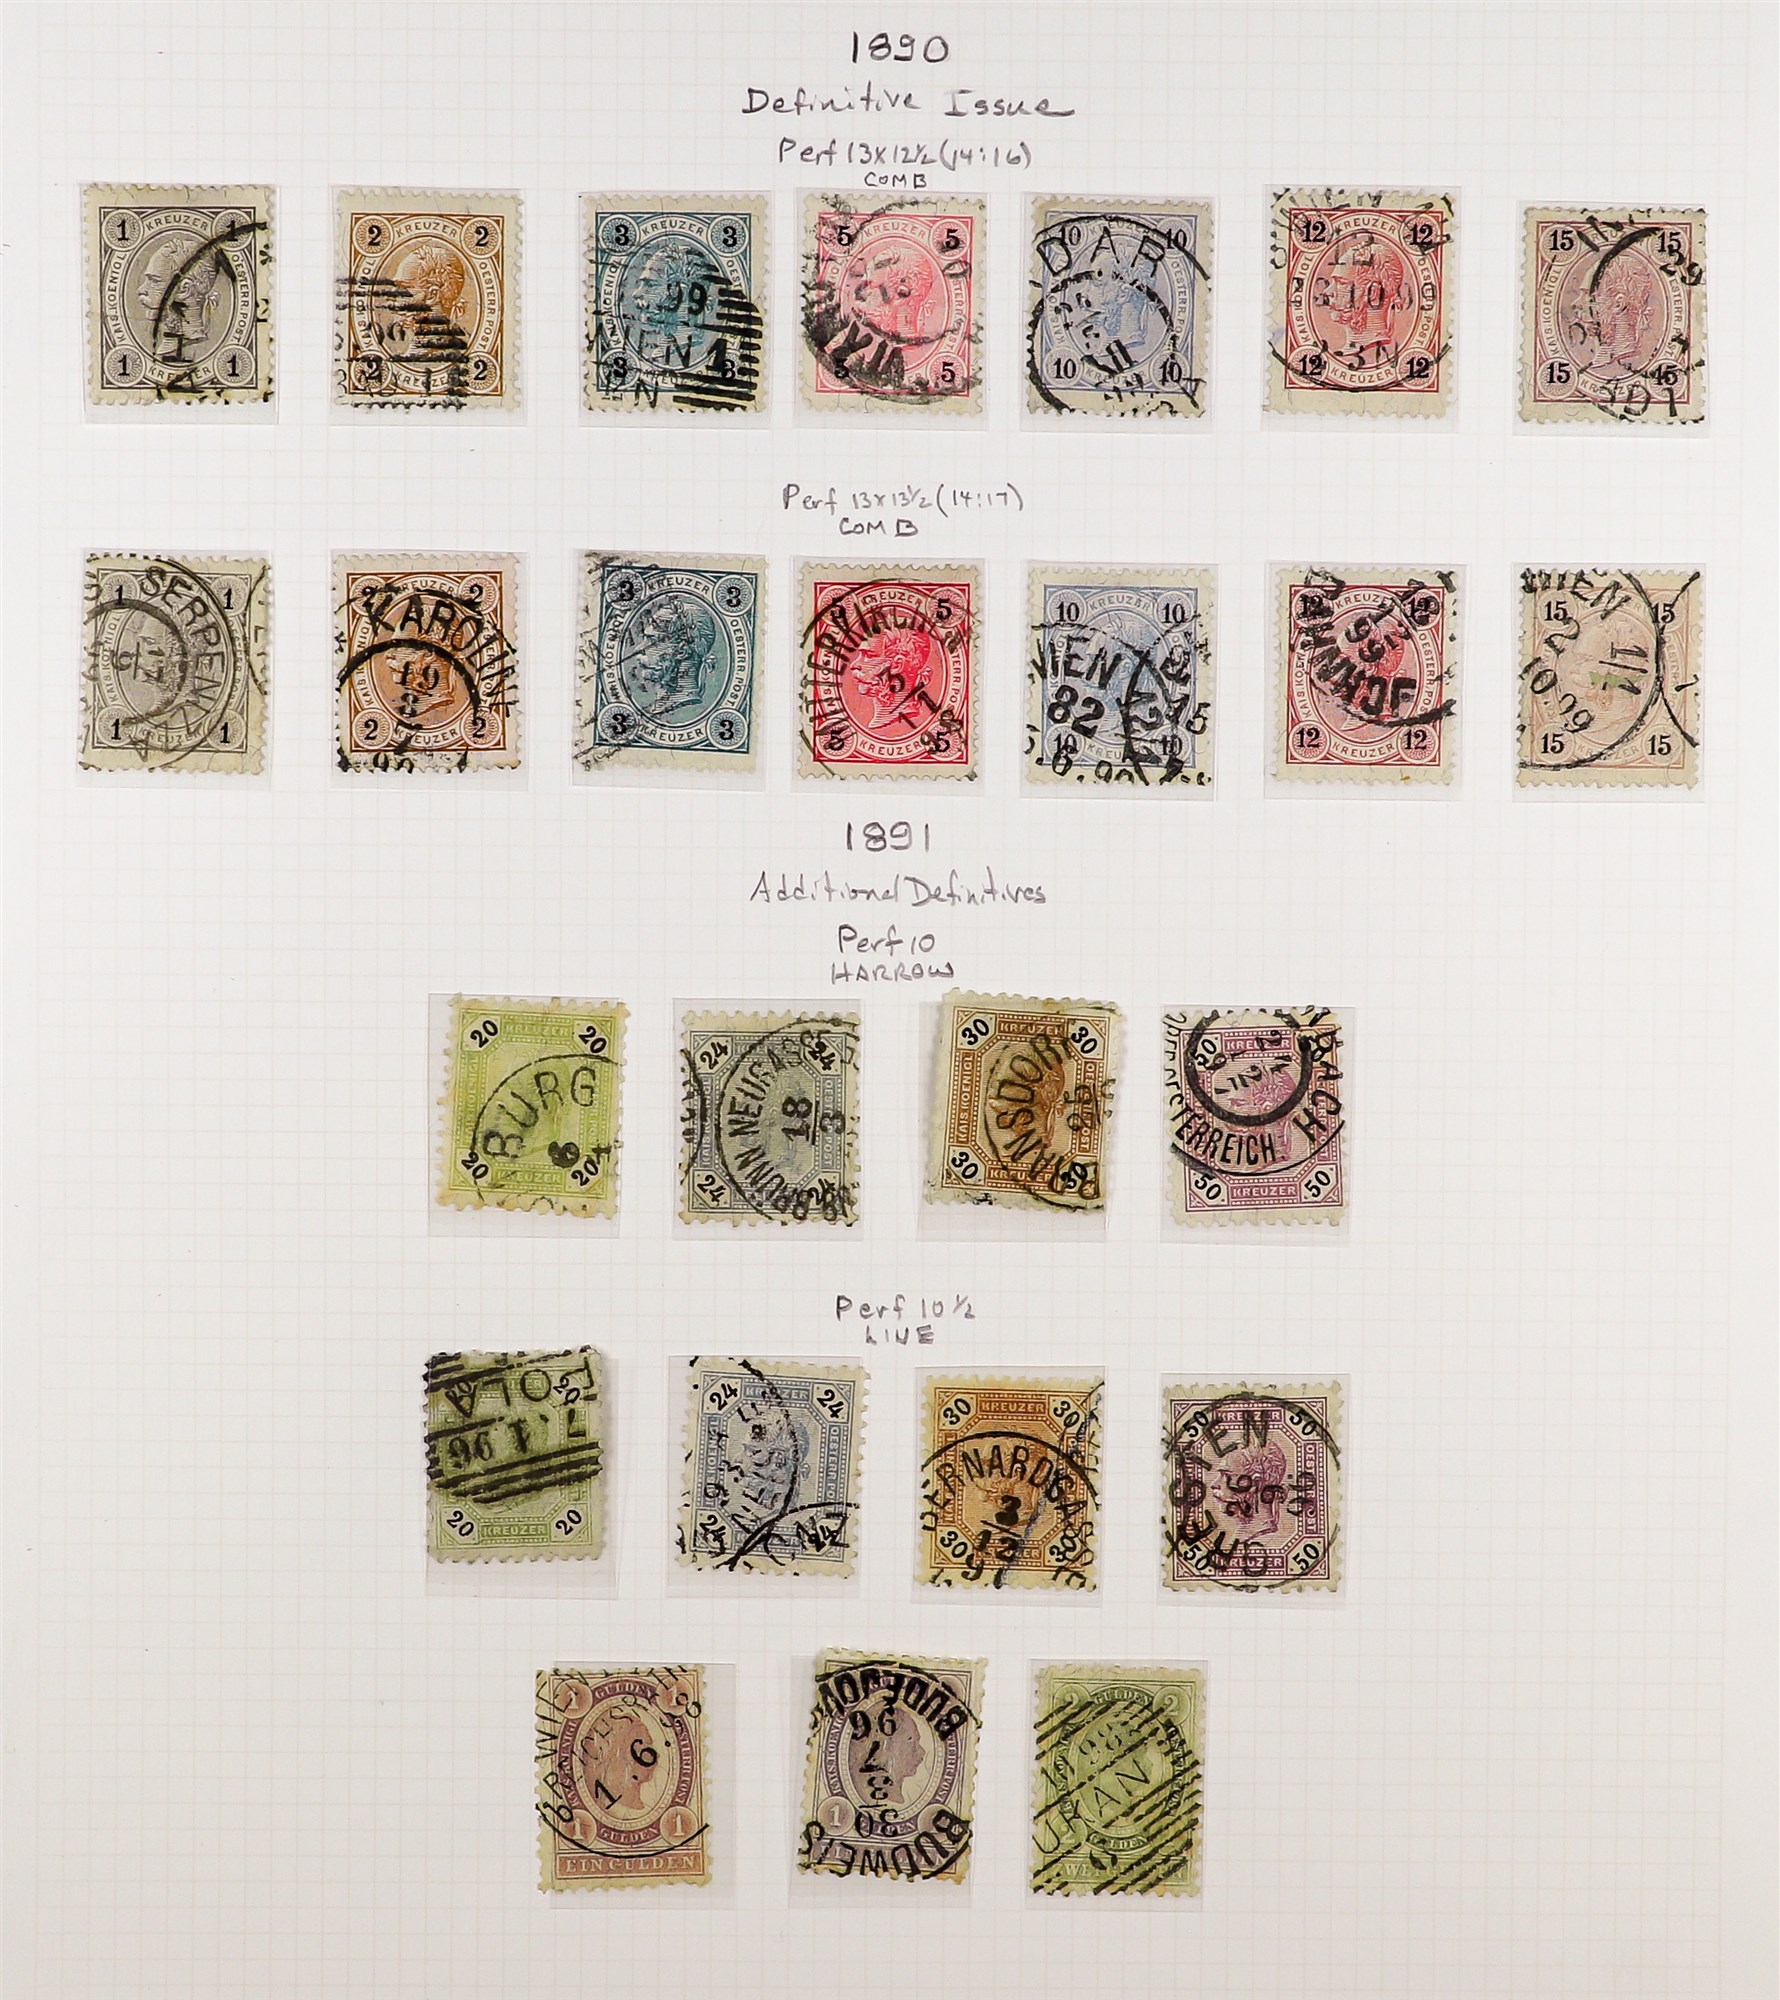 AUSTRIA 1890 - 1907 FRANZ JOSEF DEFINITIVES collection of over 300 stamps on album pages, semi- - Image 7 of 13